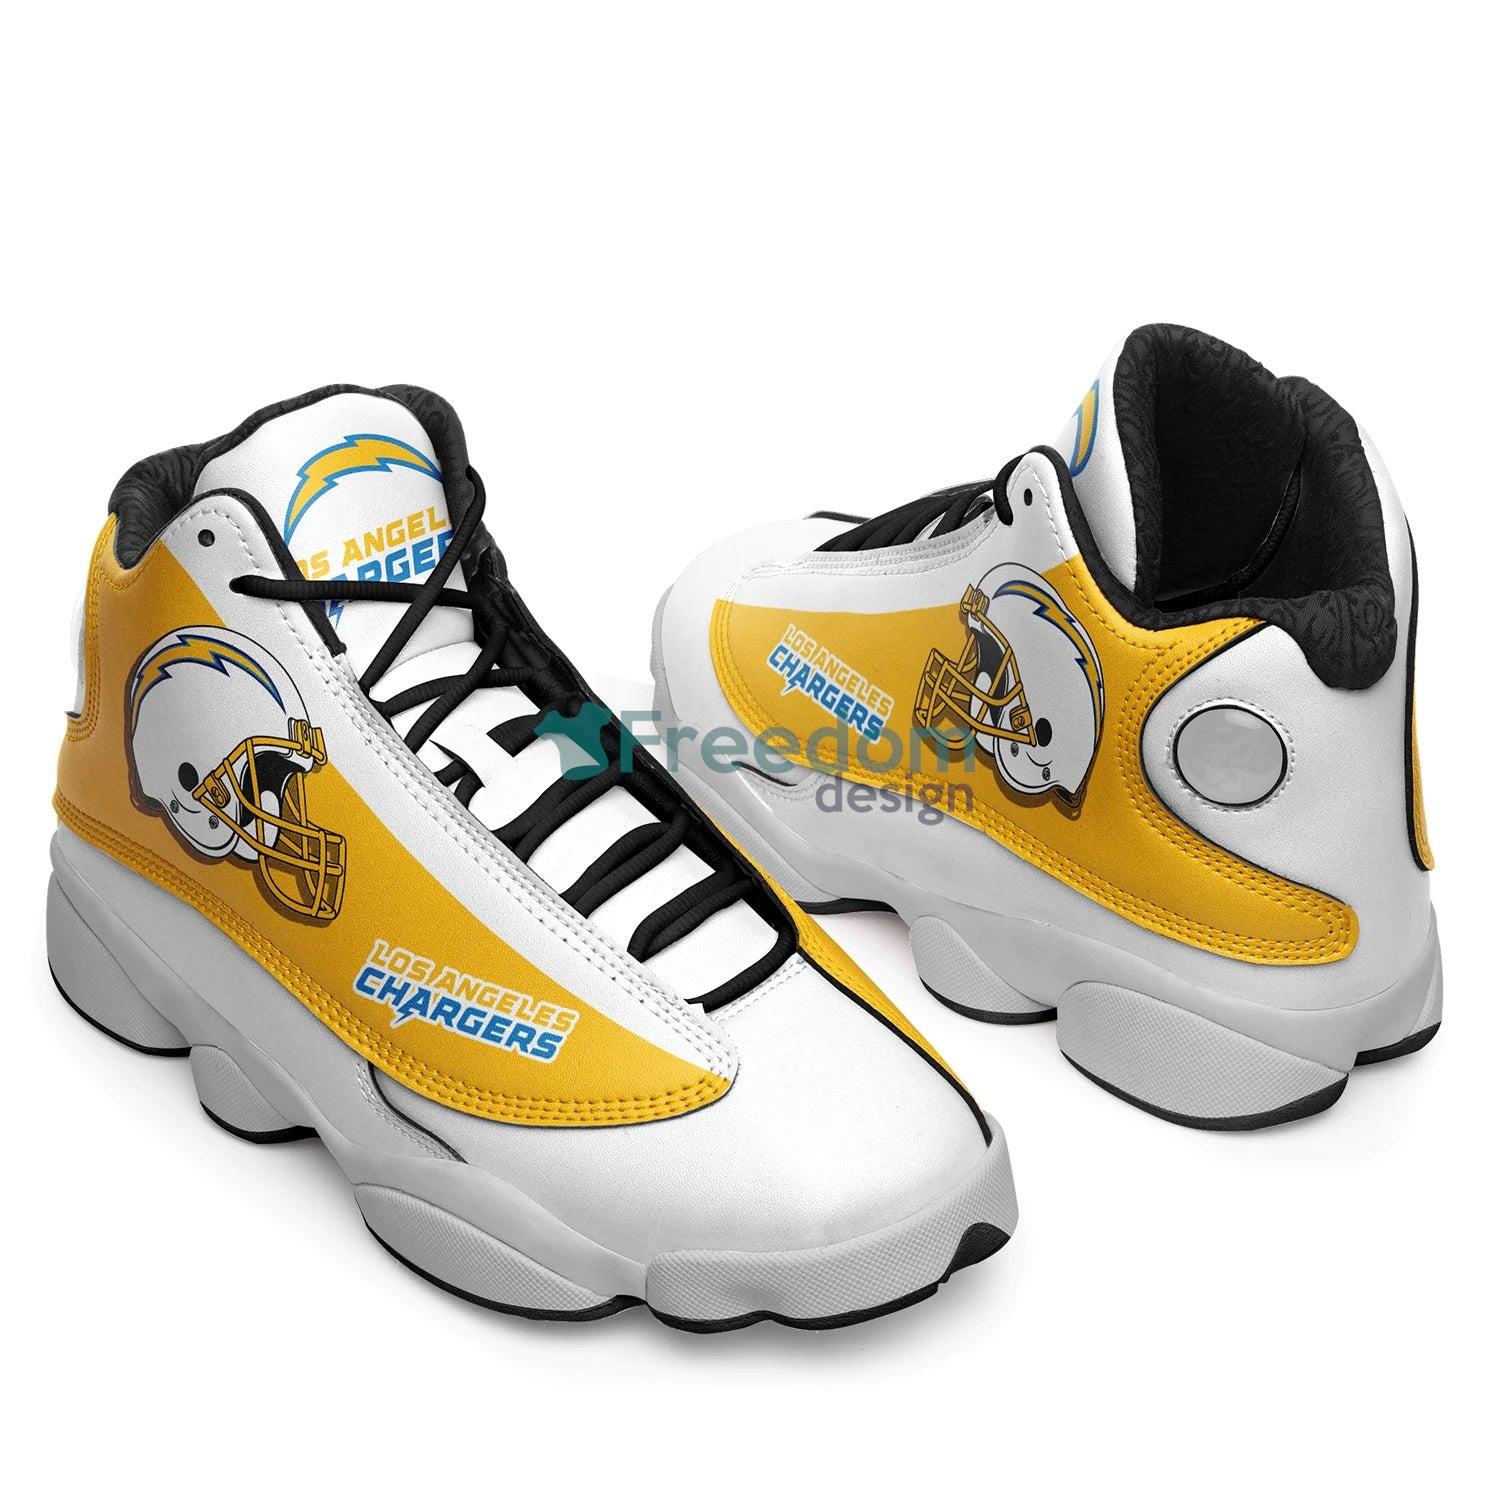 Los Angeles Chargers Team Air Jordan 13 Sneaker Shoes For Fans